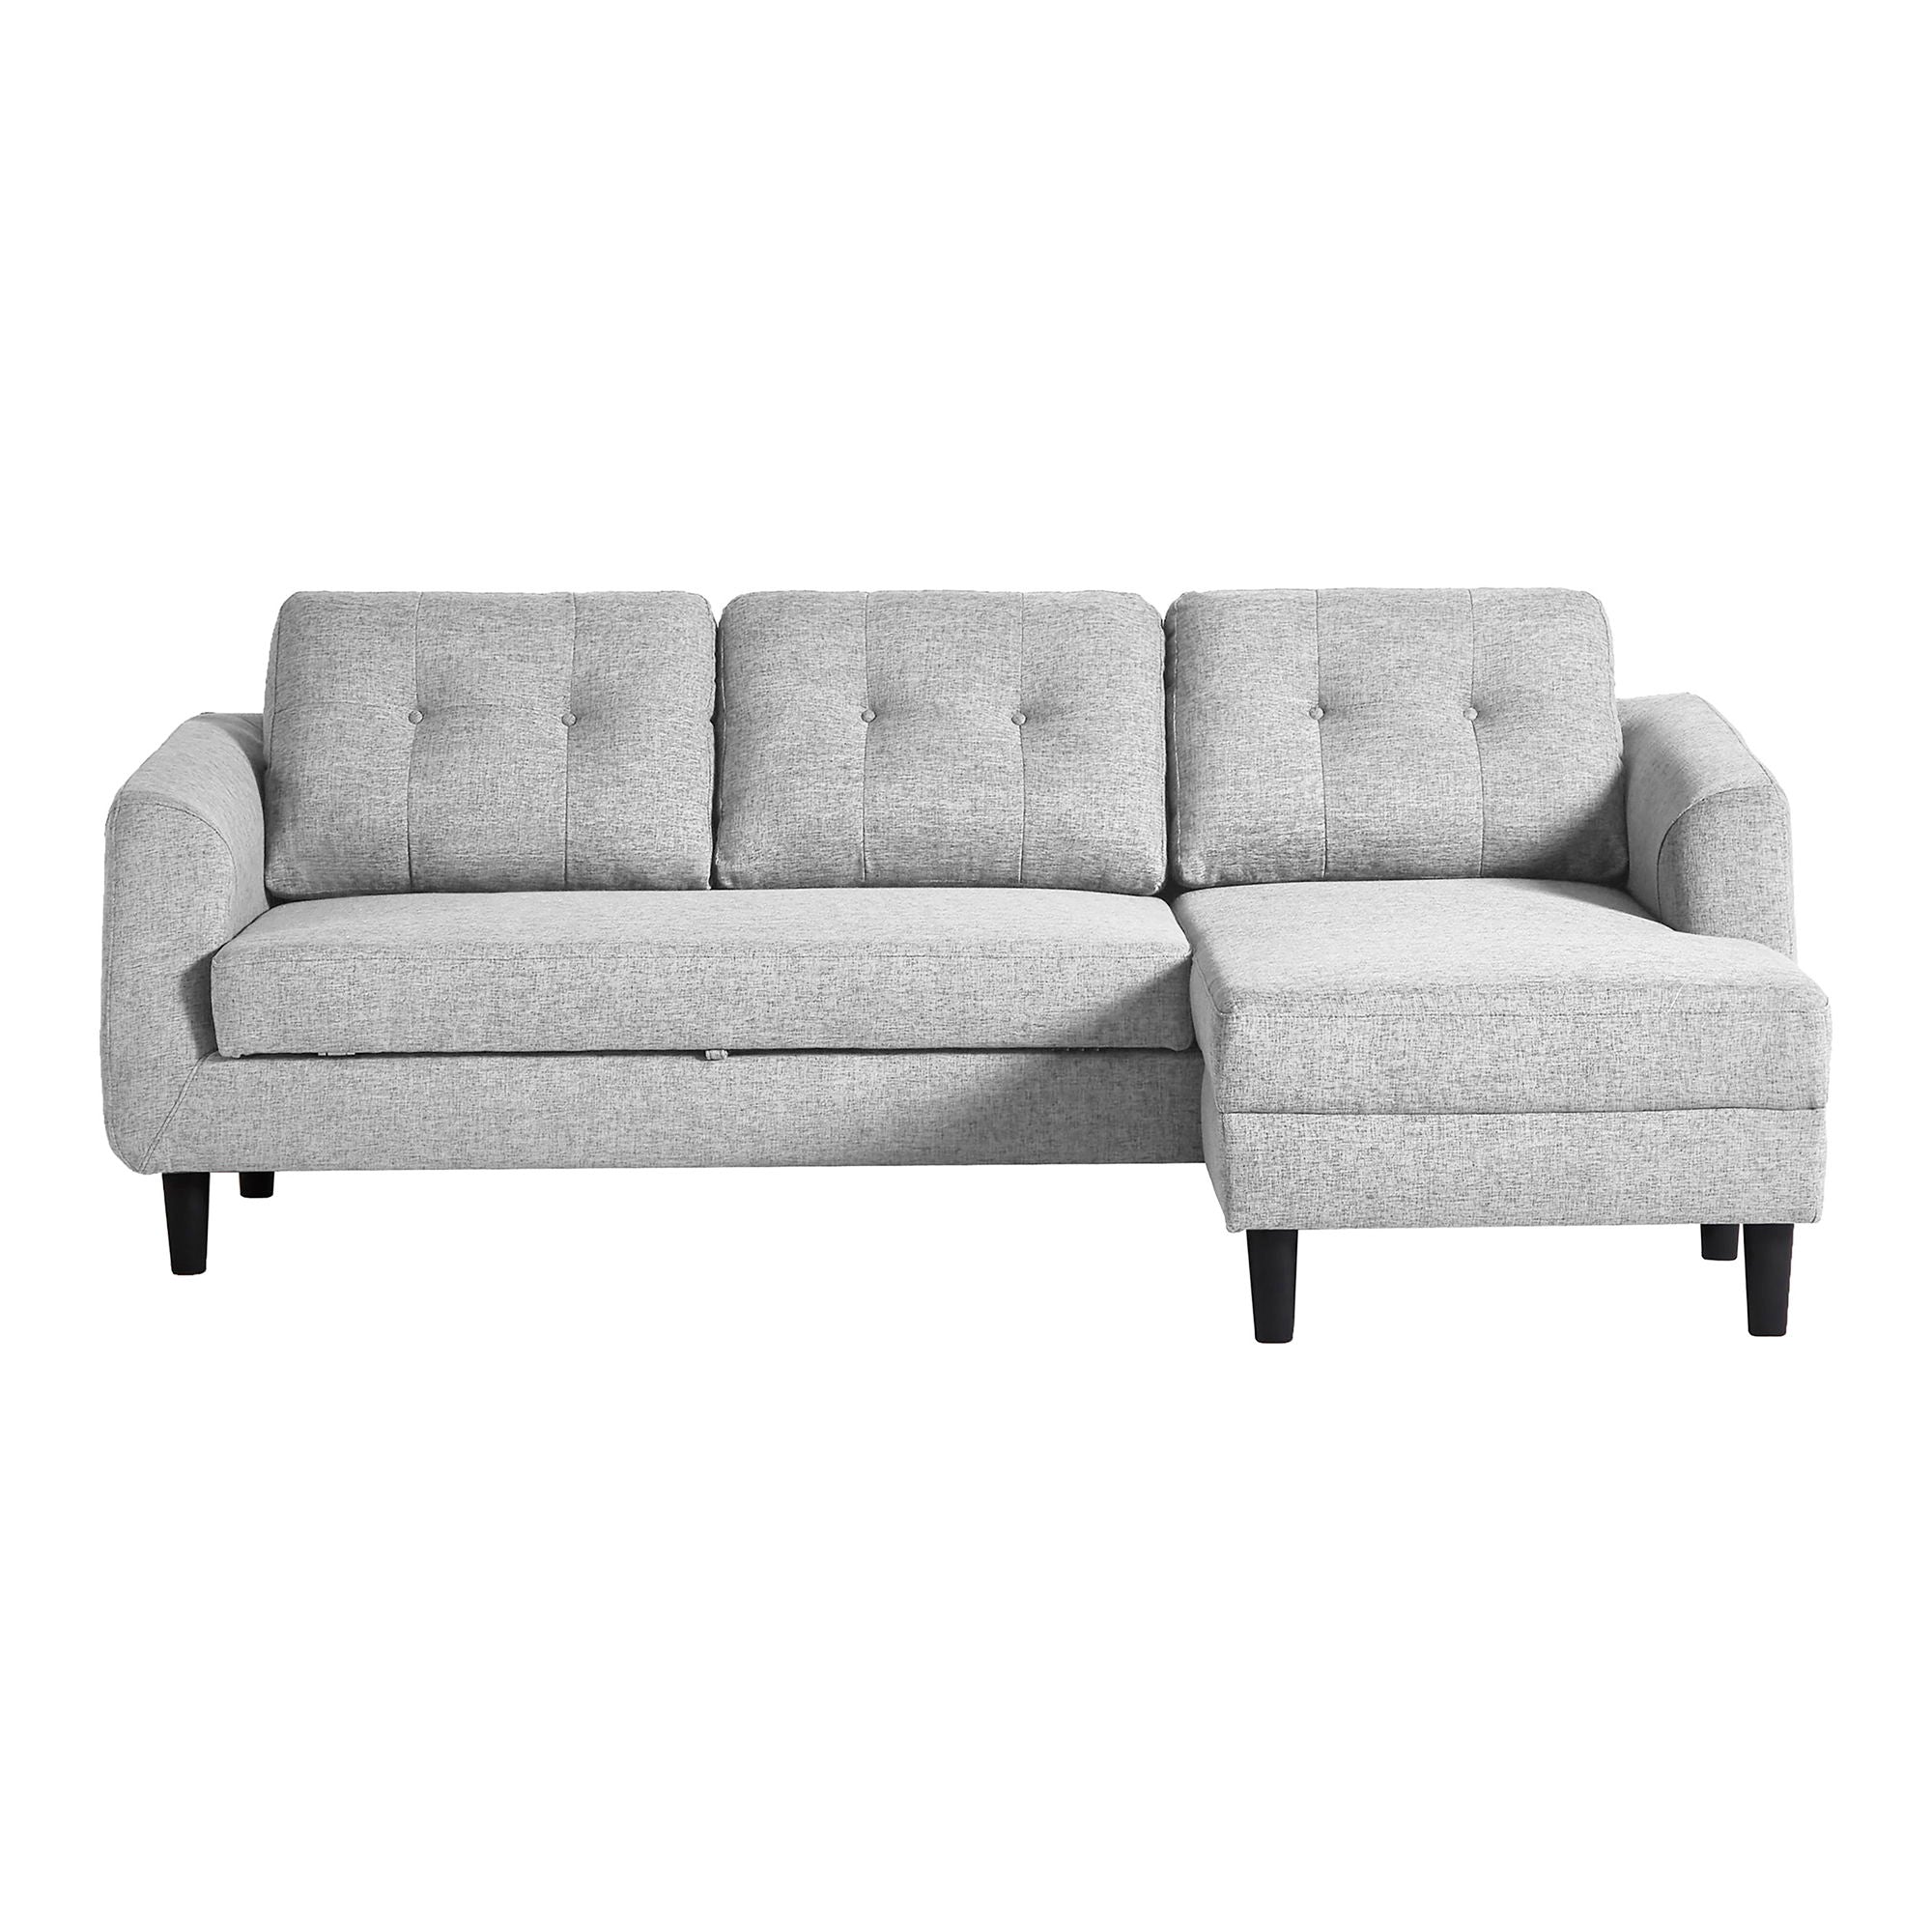 Belagio - Sofa Bed With Chaise Right - Light Gray-Stationary Sectionals-American Furniture Outlet